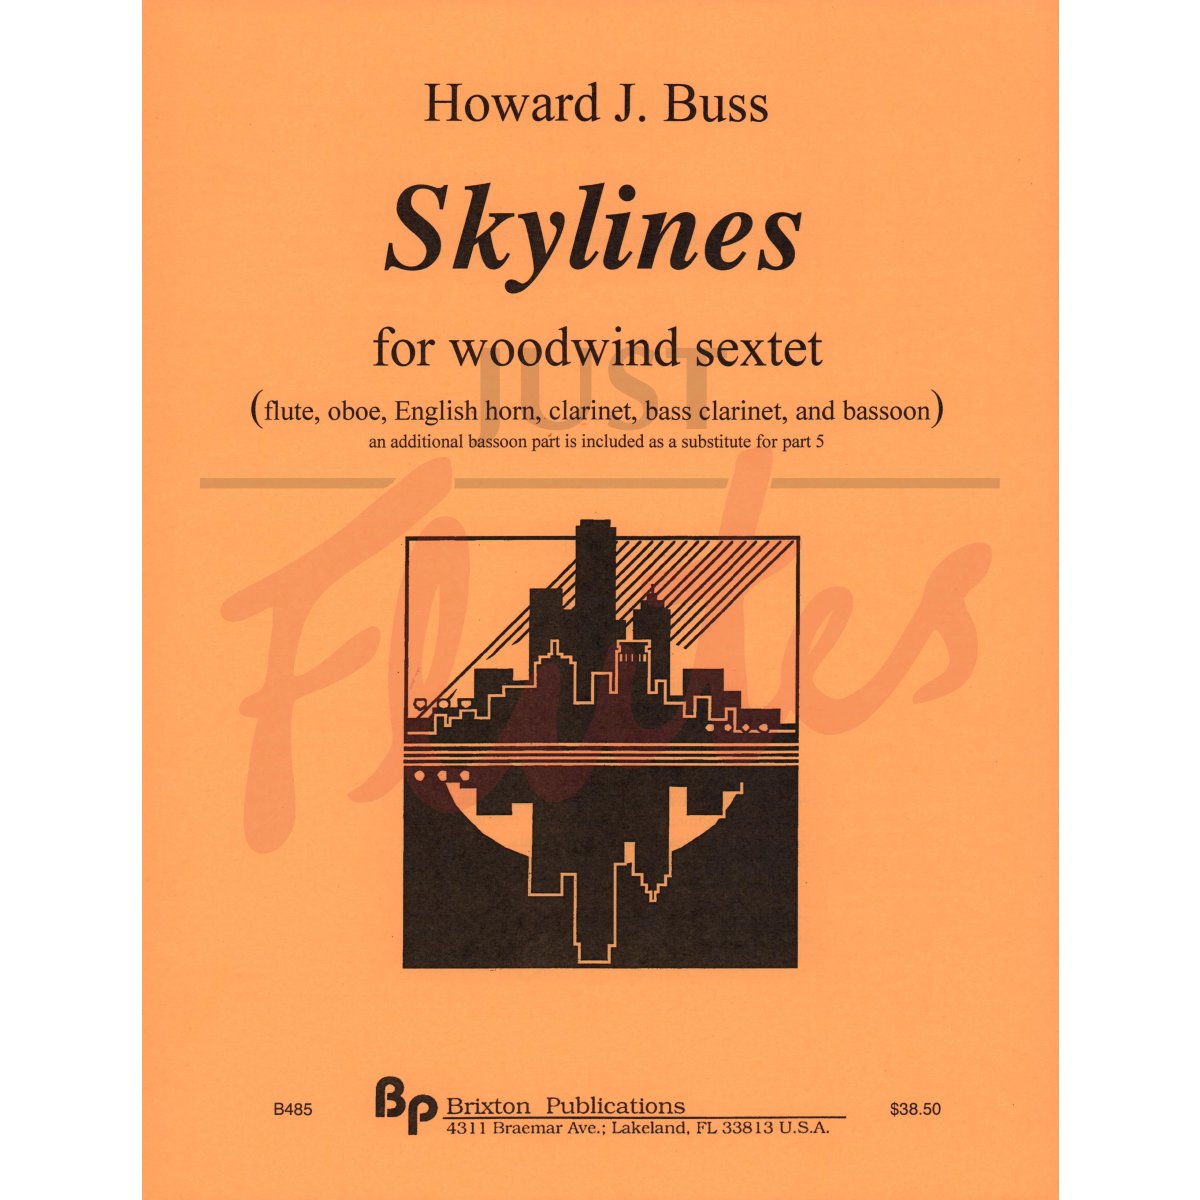 Skylines for Woodwind Sextet